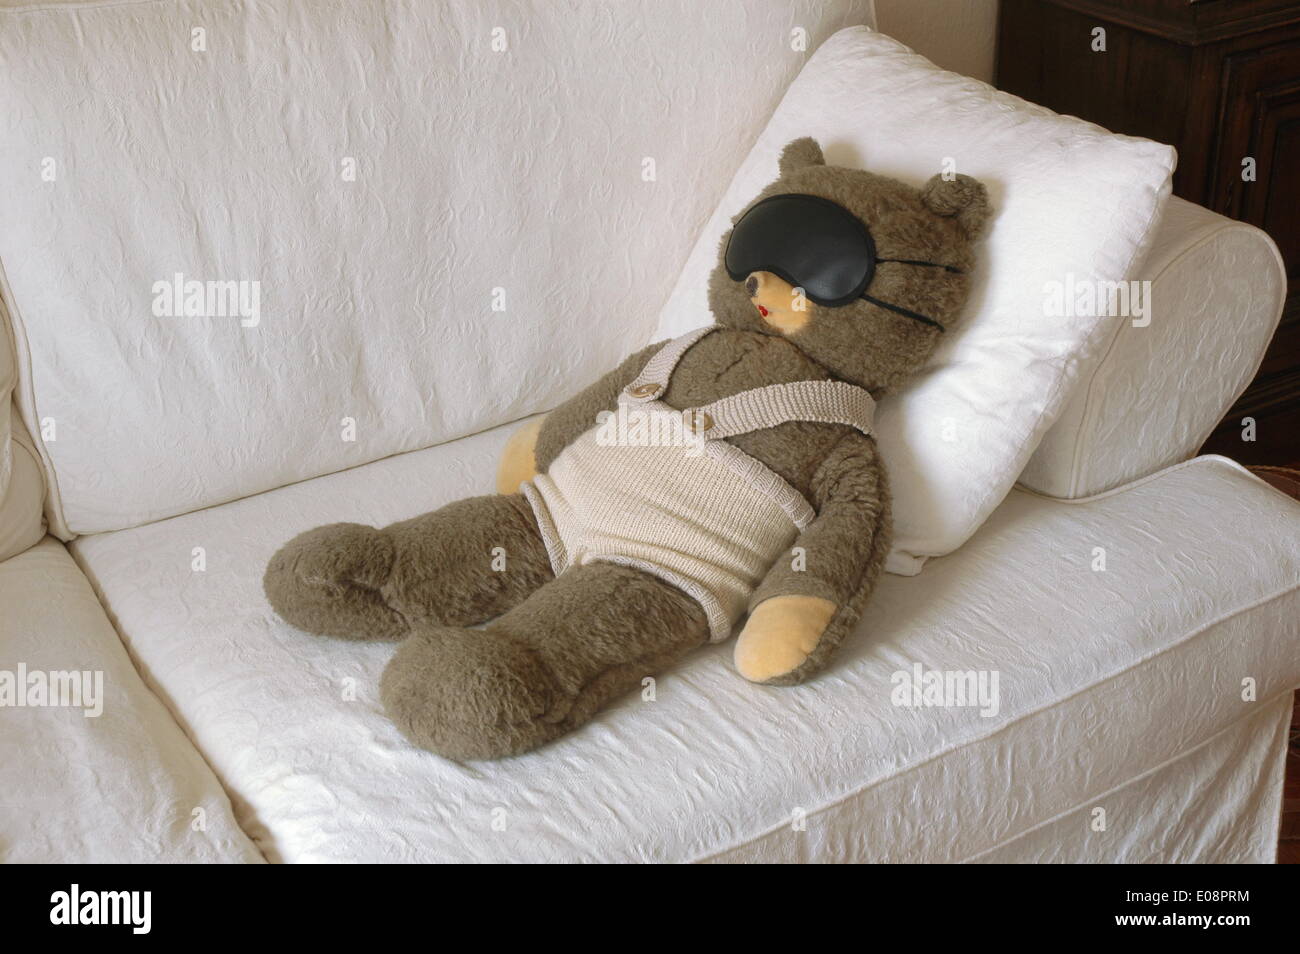 Ilustration - A teddy bear with a sleep mask lies on a couch in Germany, 07 June 2009. Fotoarchiv für Zeitgeschichte - NO WIRE SERVICE Stock Photo